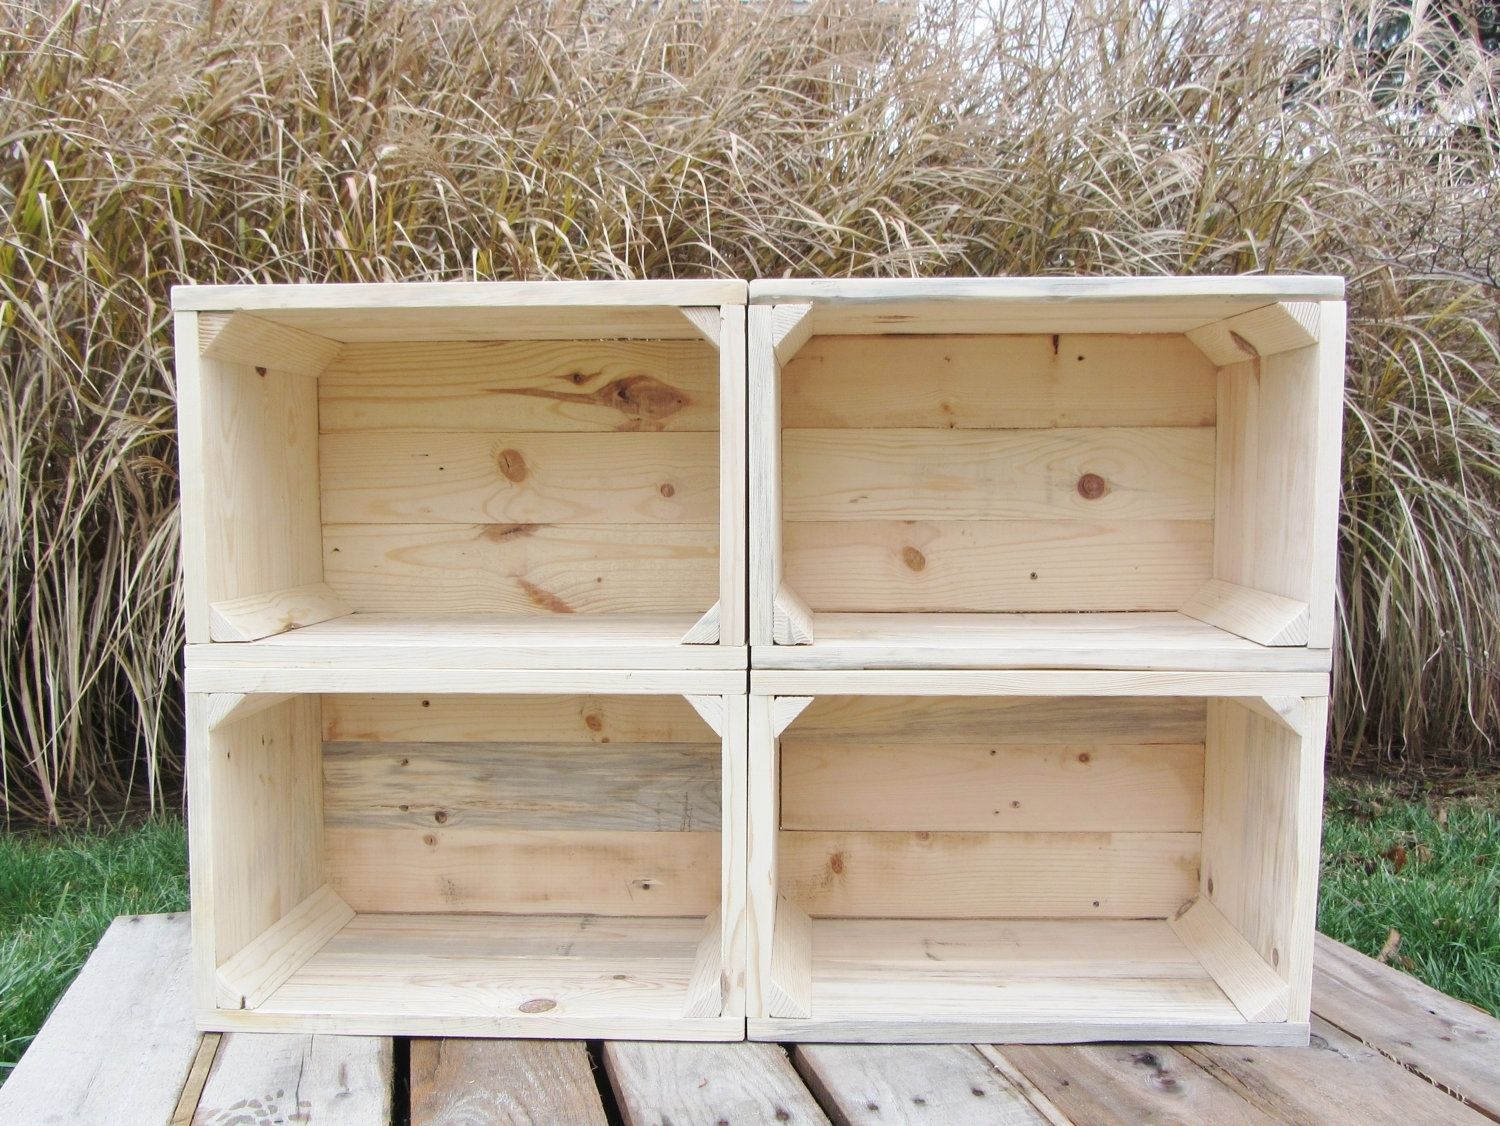 Custom Wood Boxes and Crates for Variety of Uses - H A Stiles